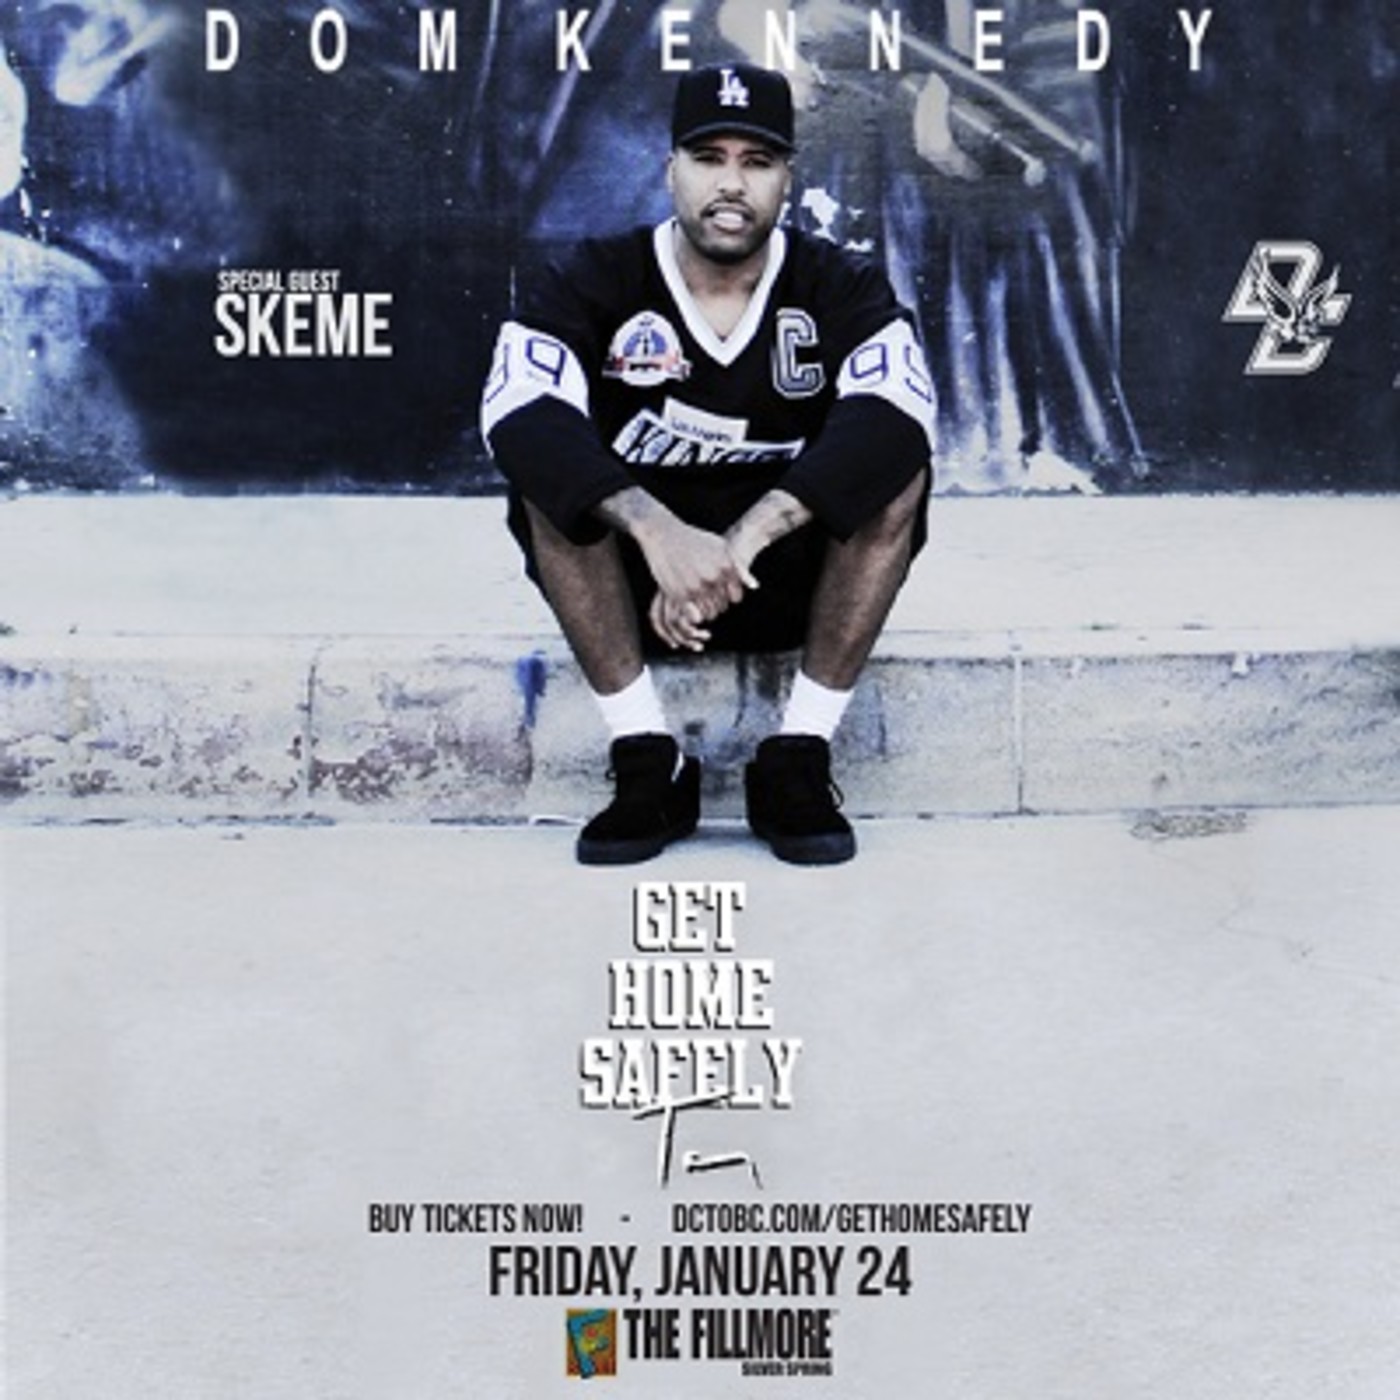 dom kennedy discography tpb